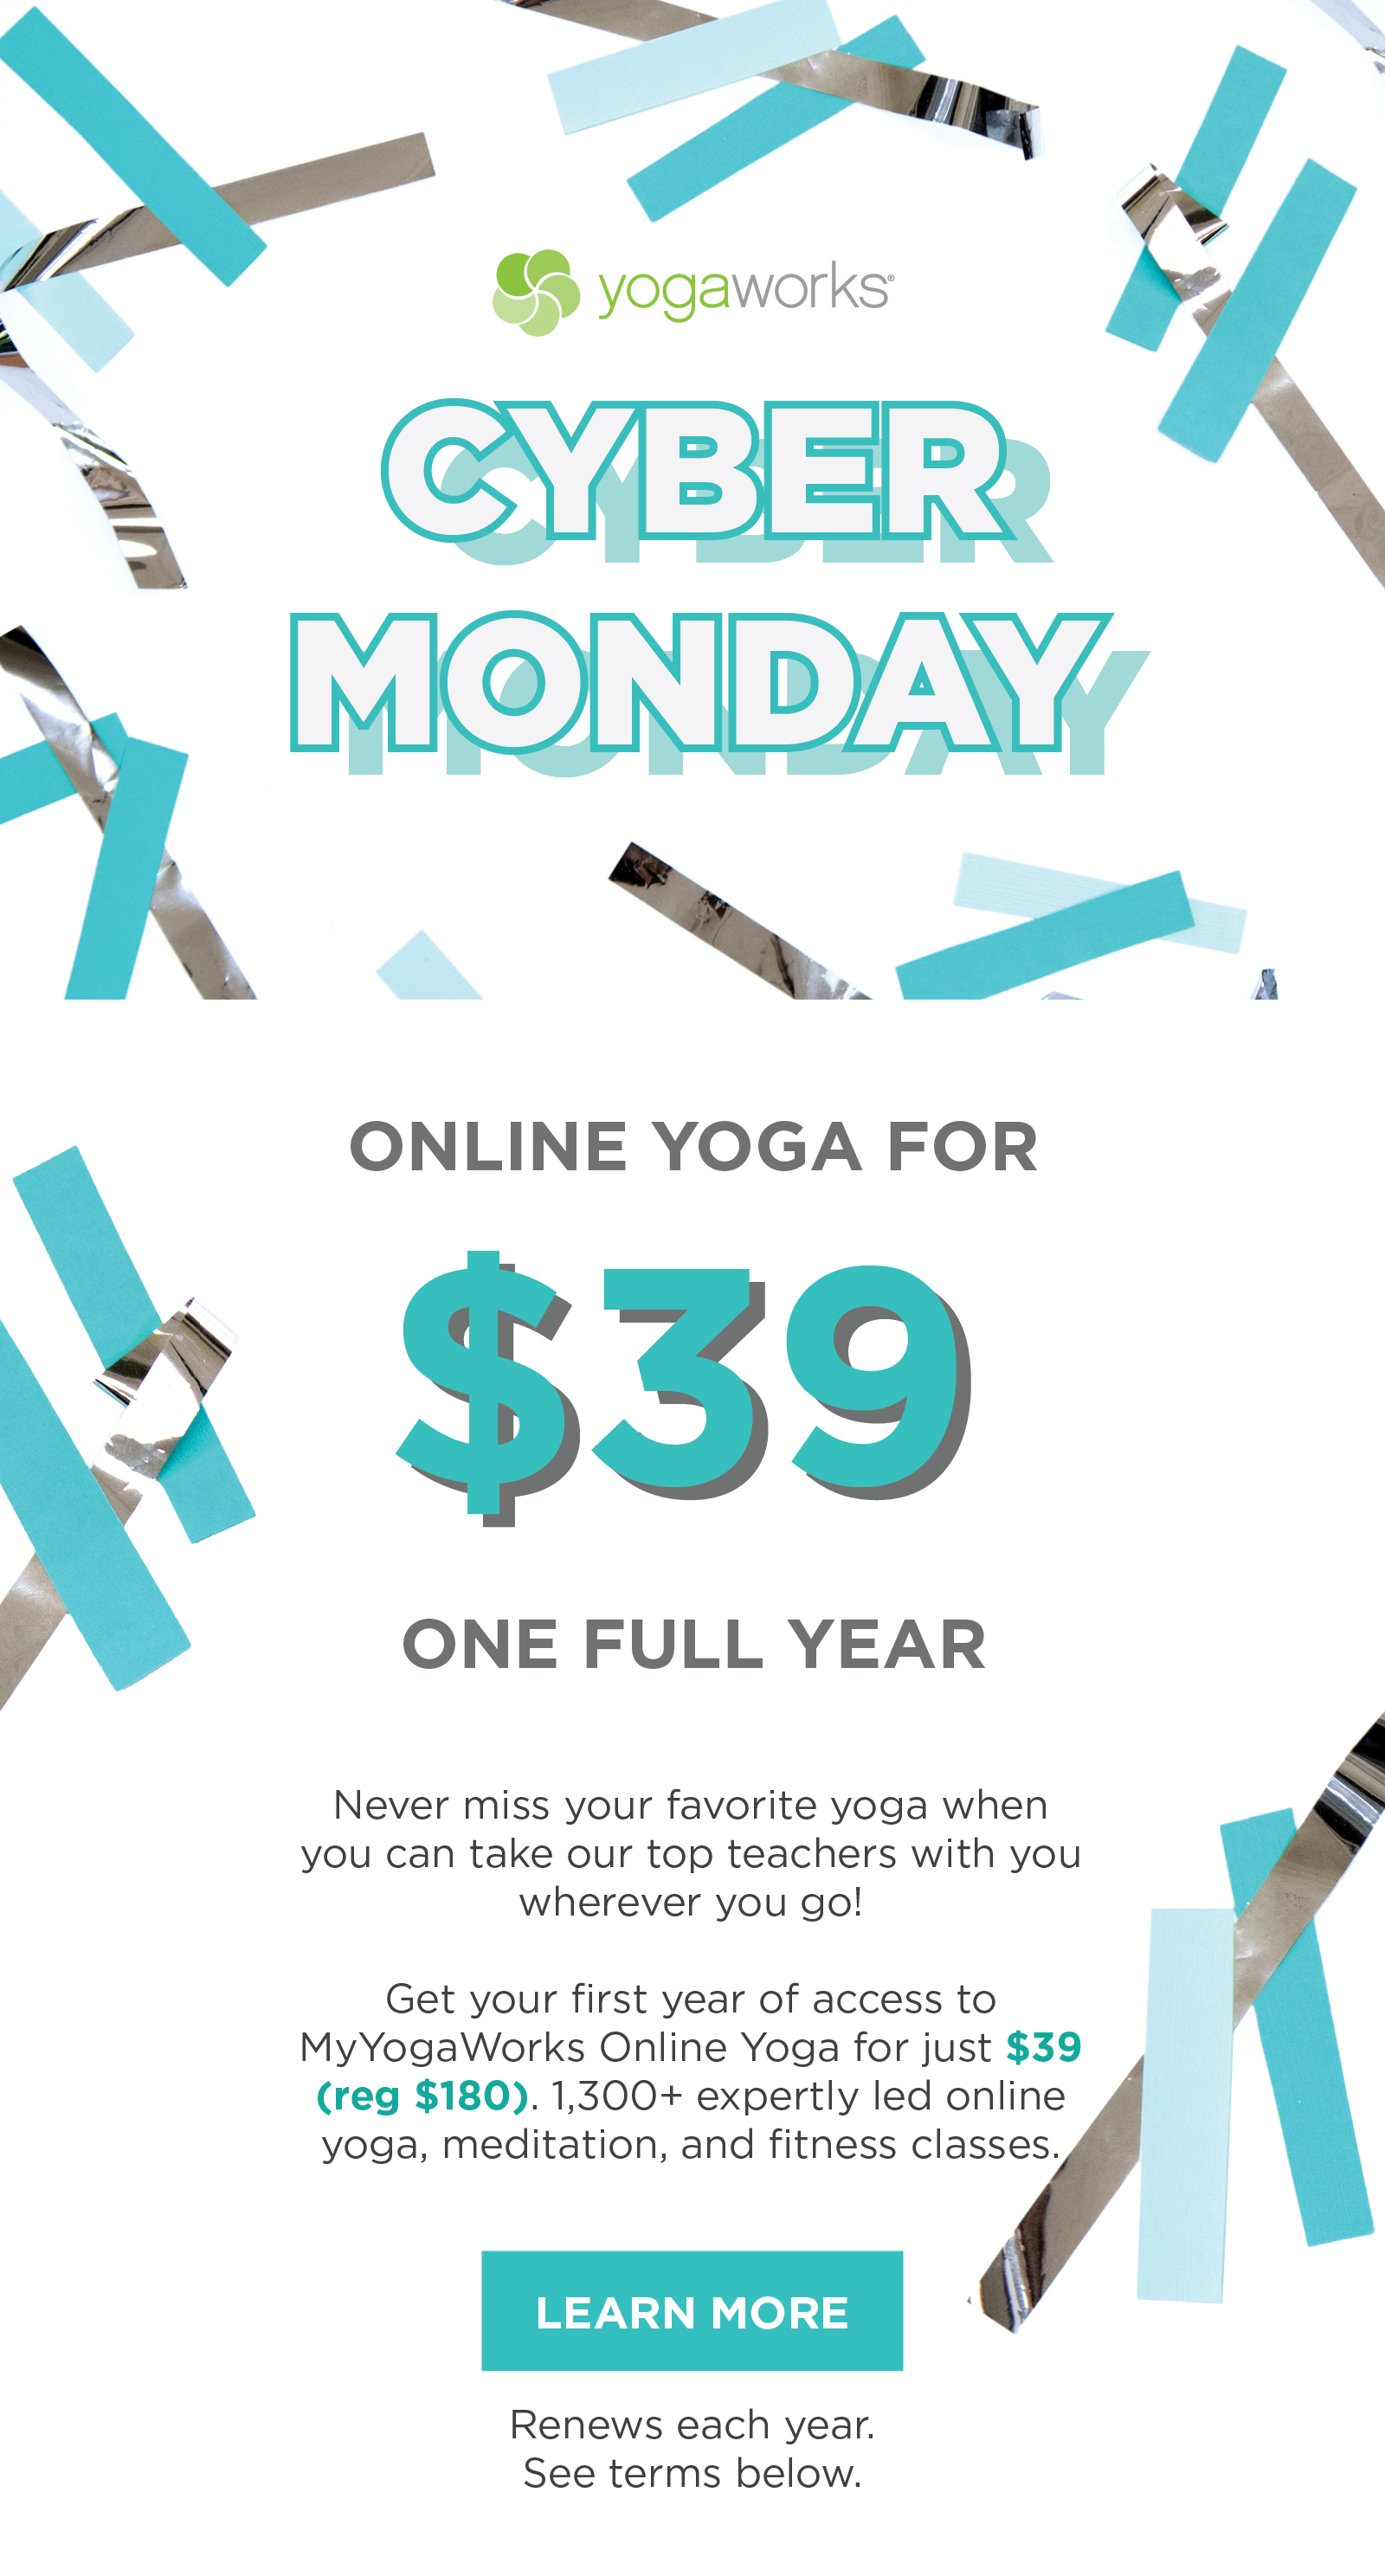 Online yoga for $39/year!